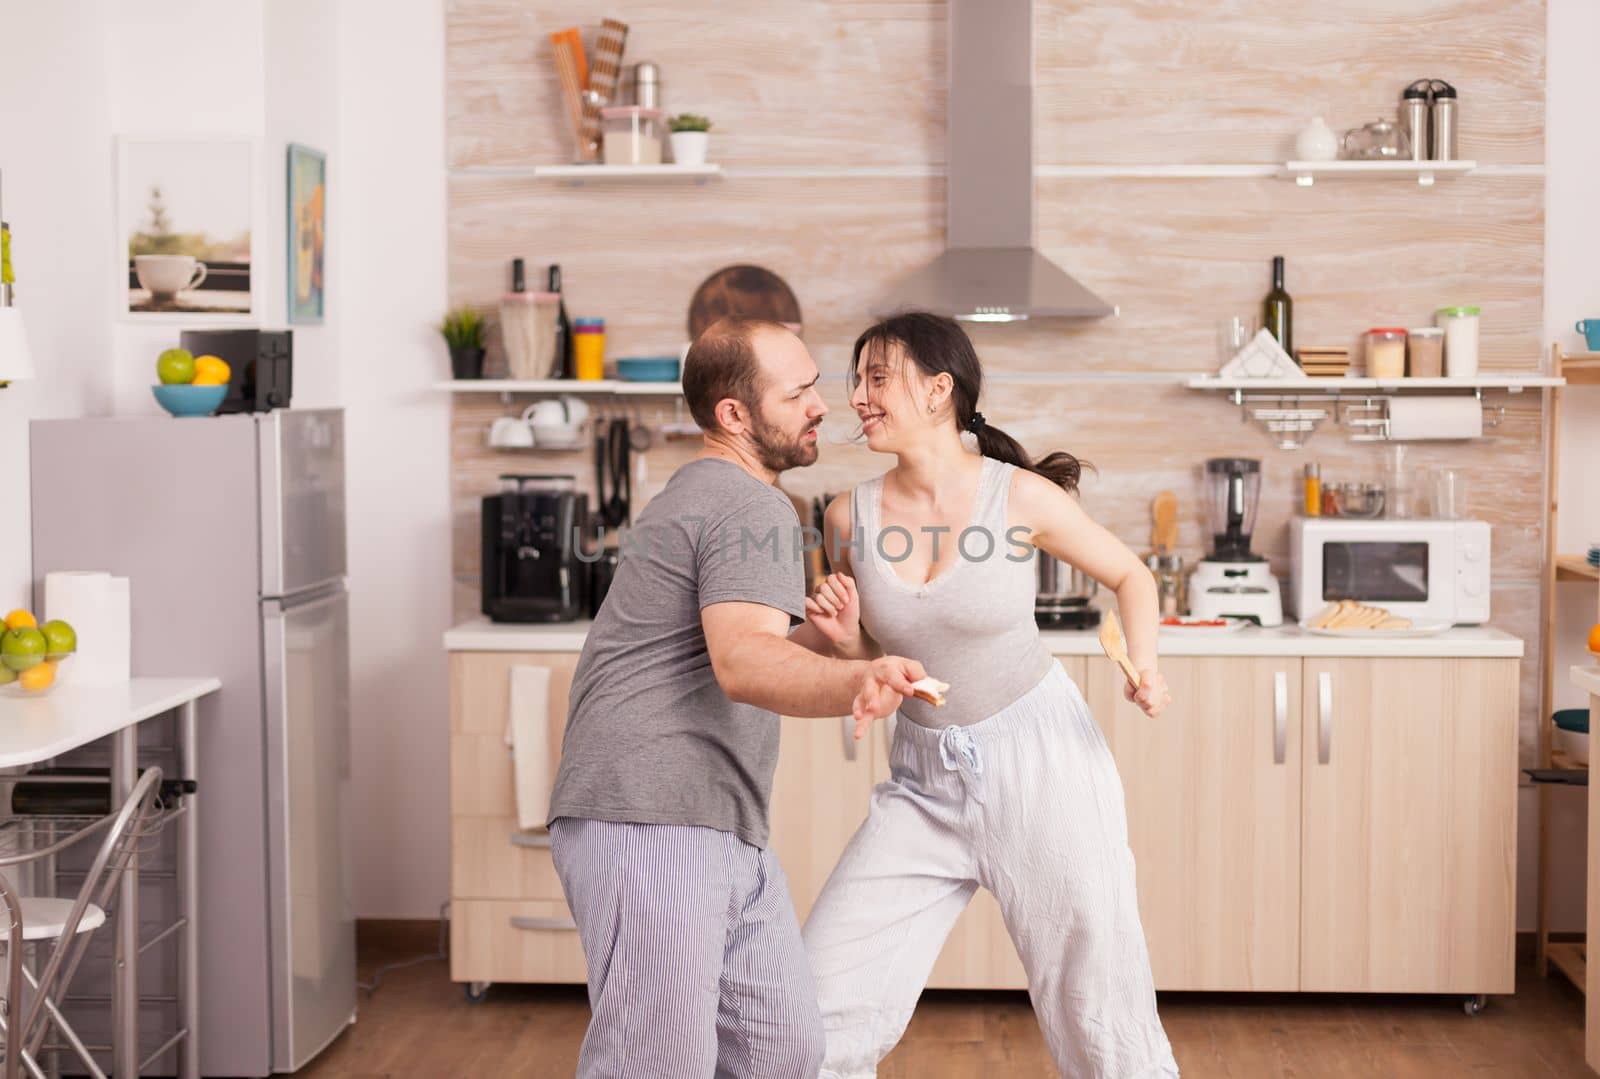 Positive cheerful crazy couple dancing while having breakfast in kitchen wearing pajamas. Carefree wife and husband laughing having fun funny enjoying life authentic married people positive happy relation